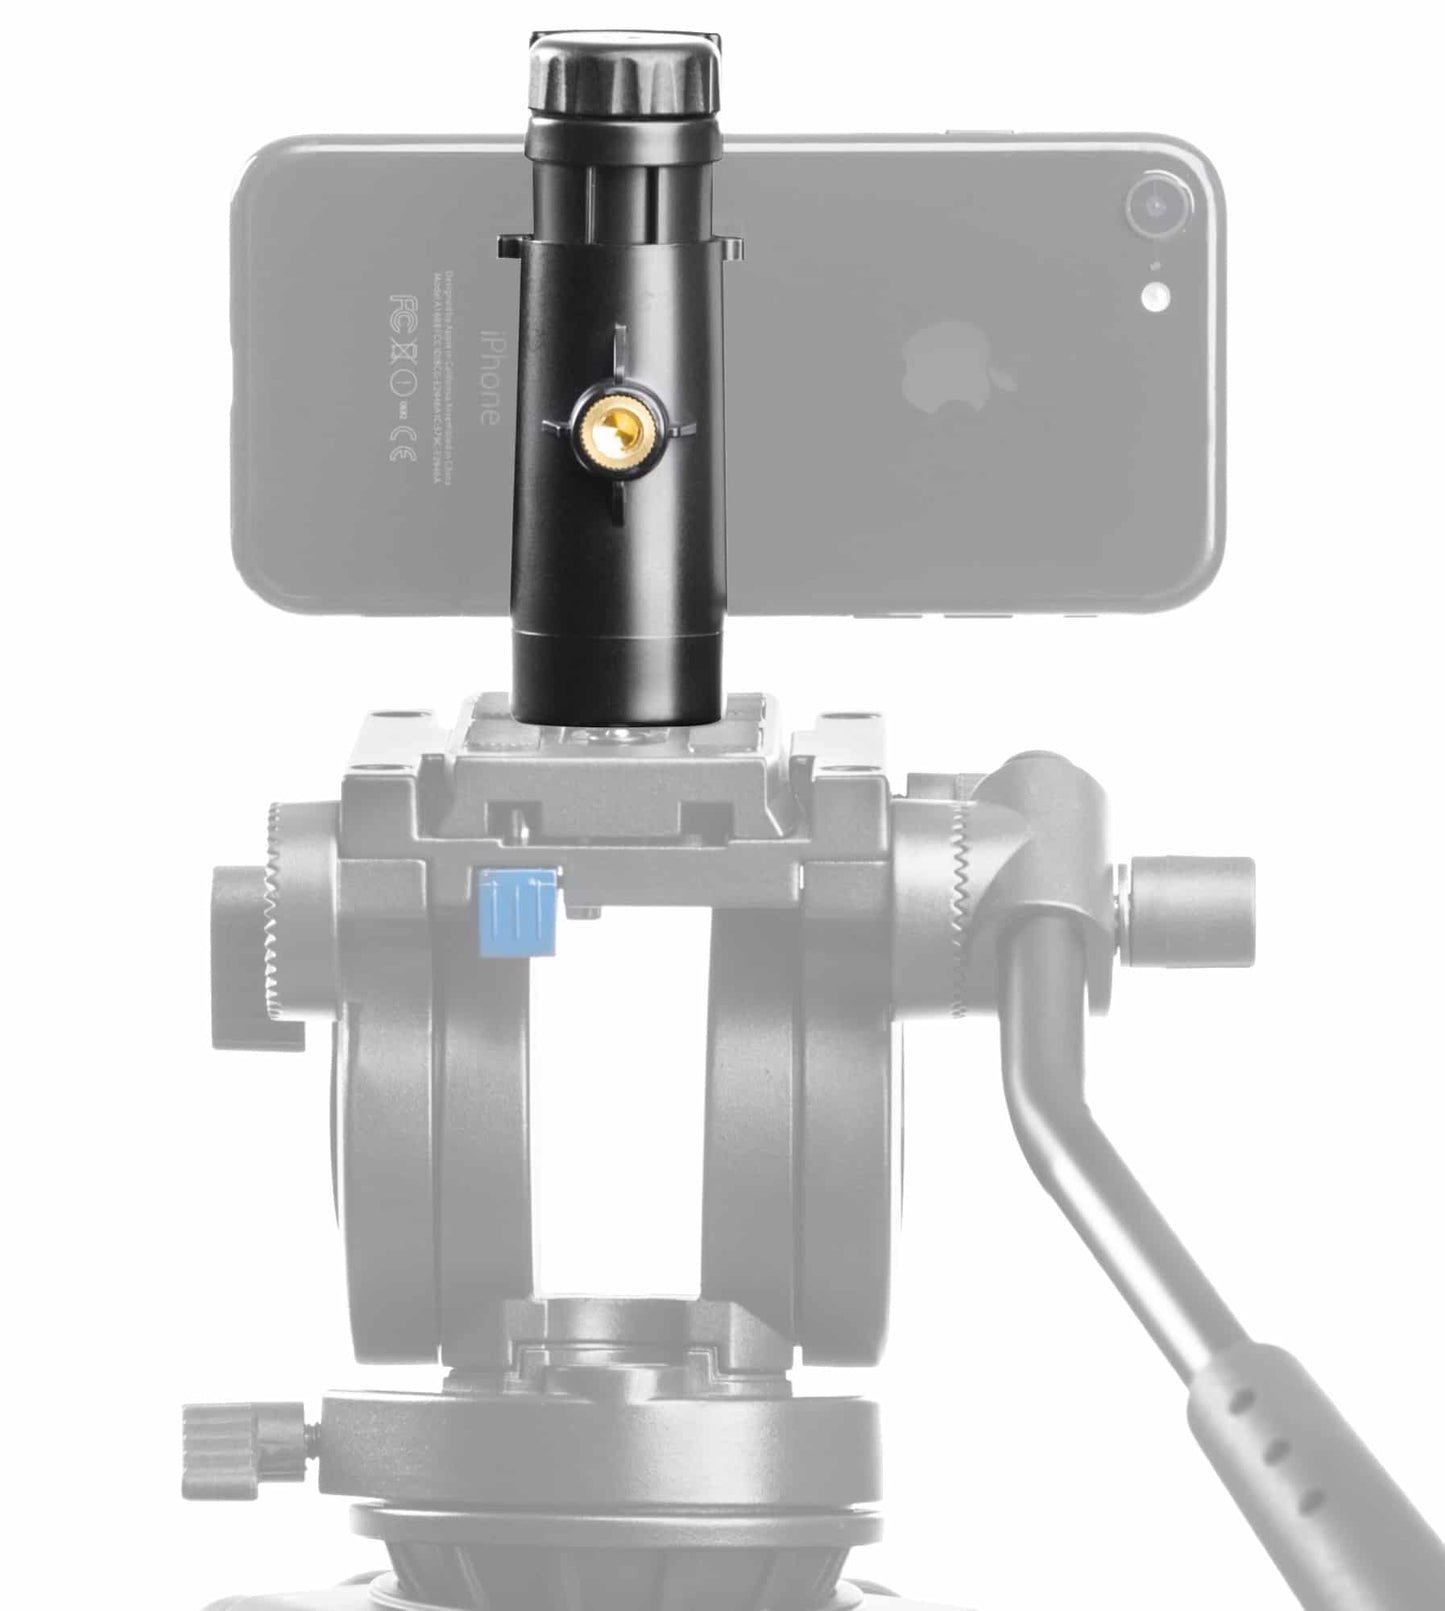 Sevenoak SK-PSC1 phone holder with cold shoe, grip handle and tripod mount